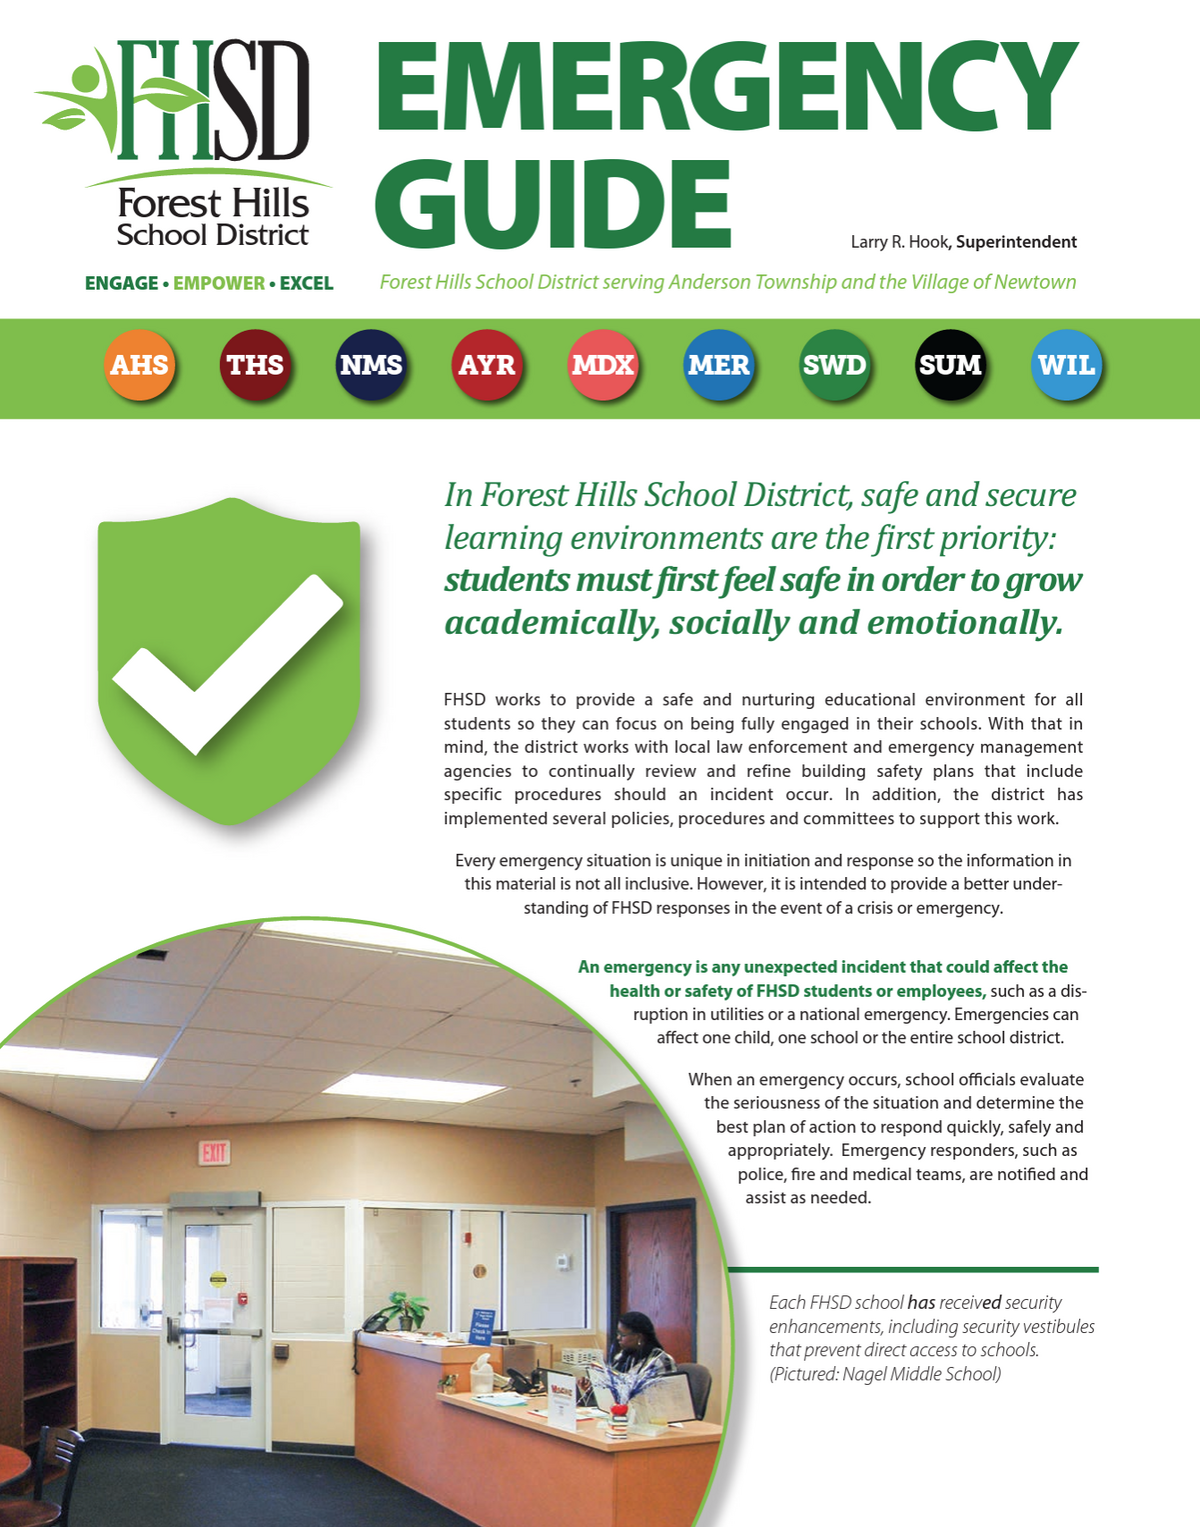 Cover Image of the FHSD Emergency Guide